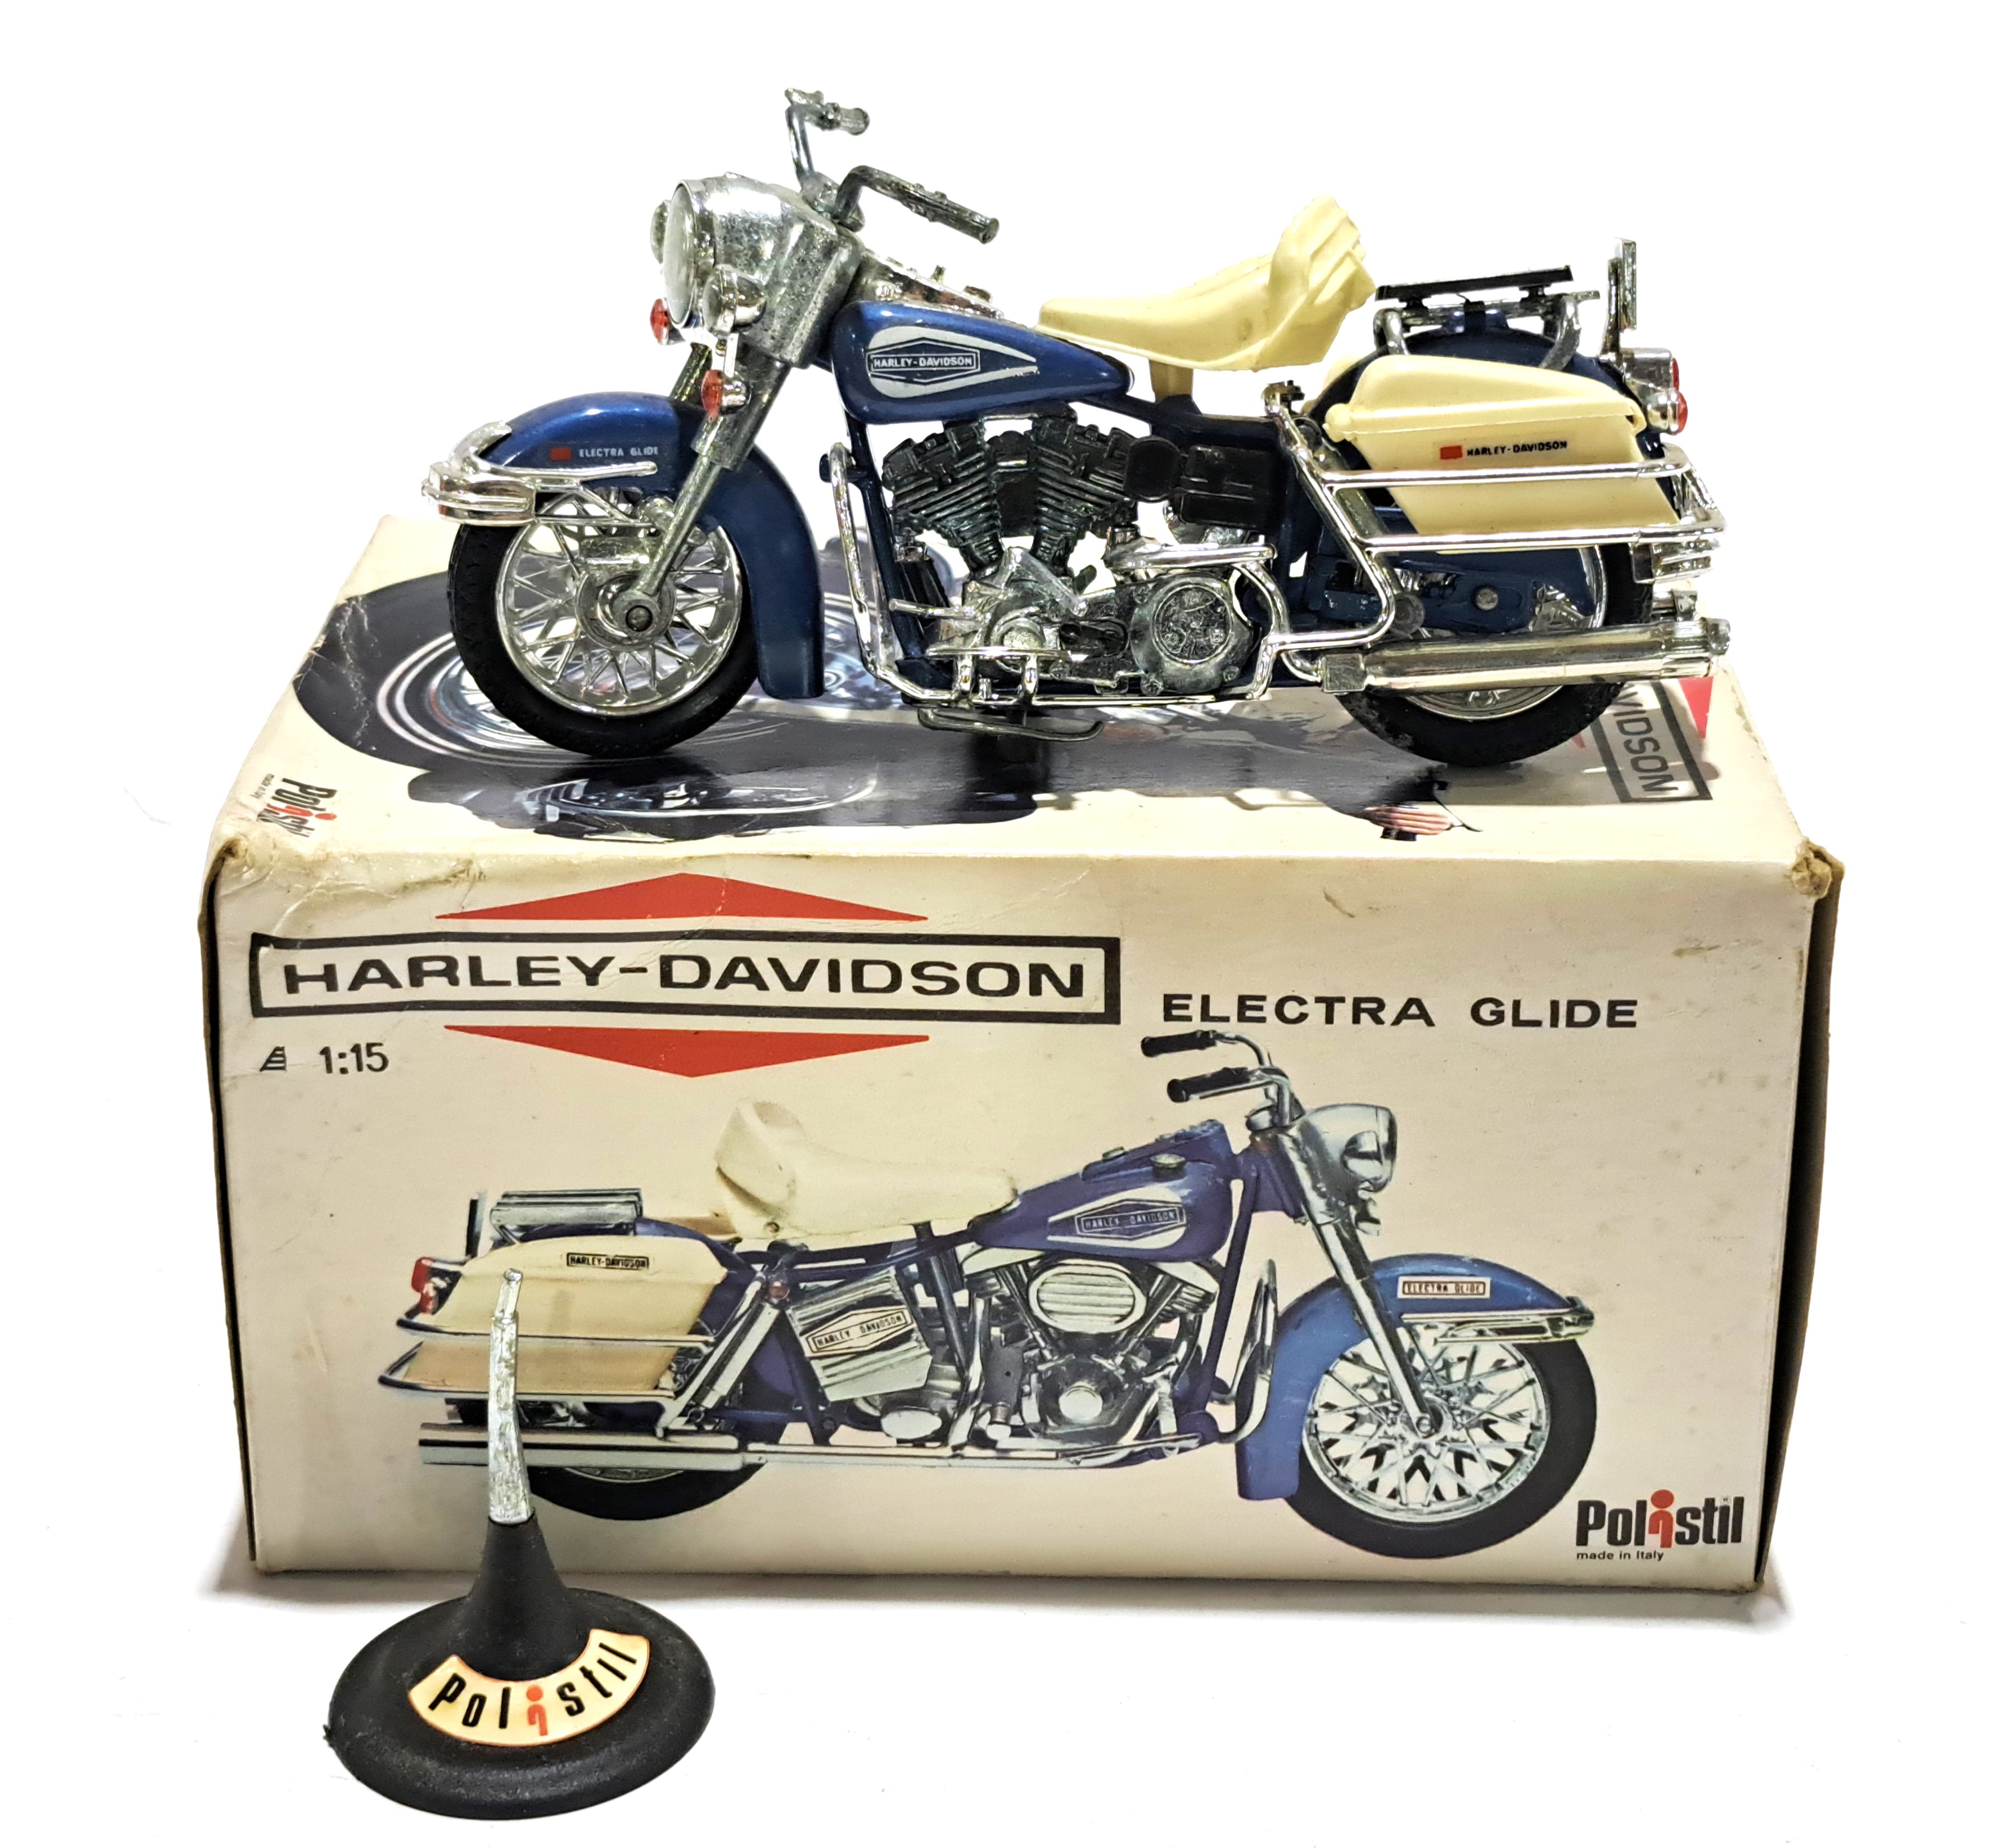 Polistil, a boxed pair of motorcycles - Image 3 of 3